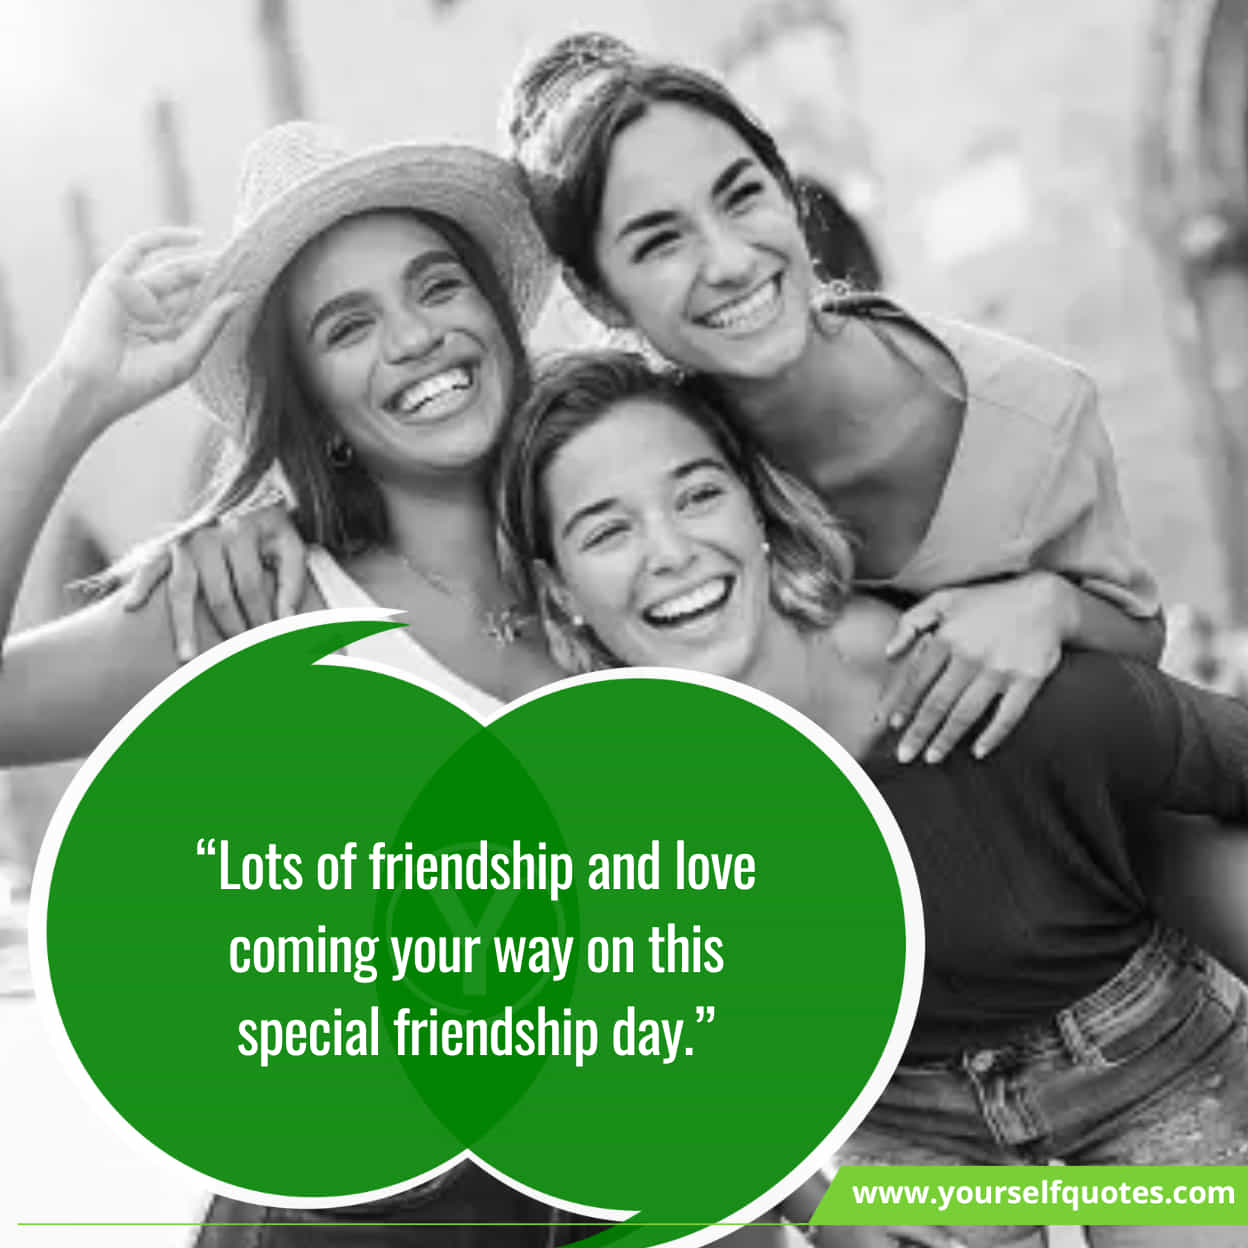 Quotes to express gratitude for friends on Friendship Day